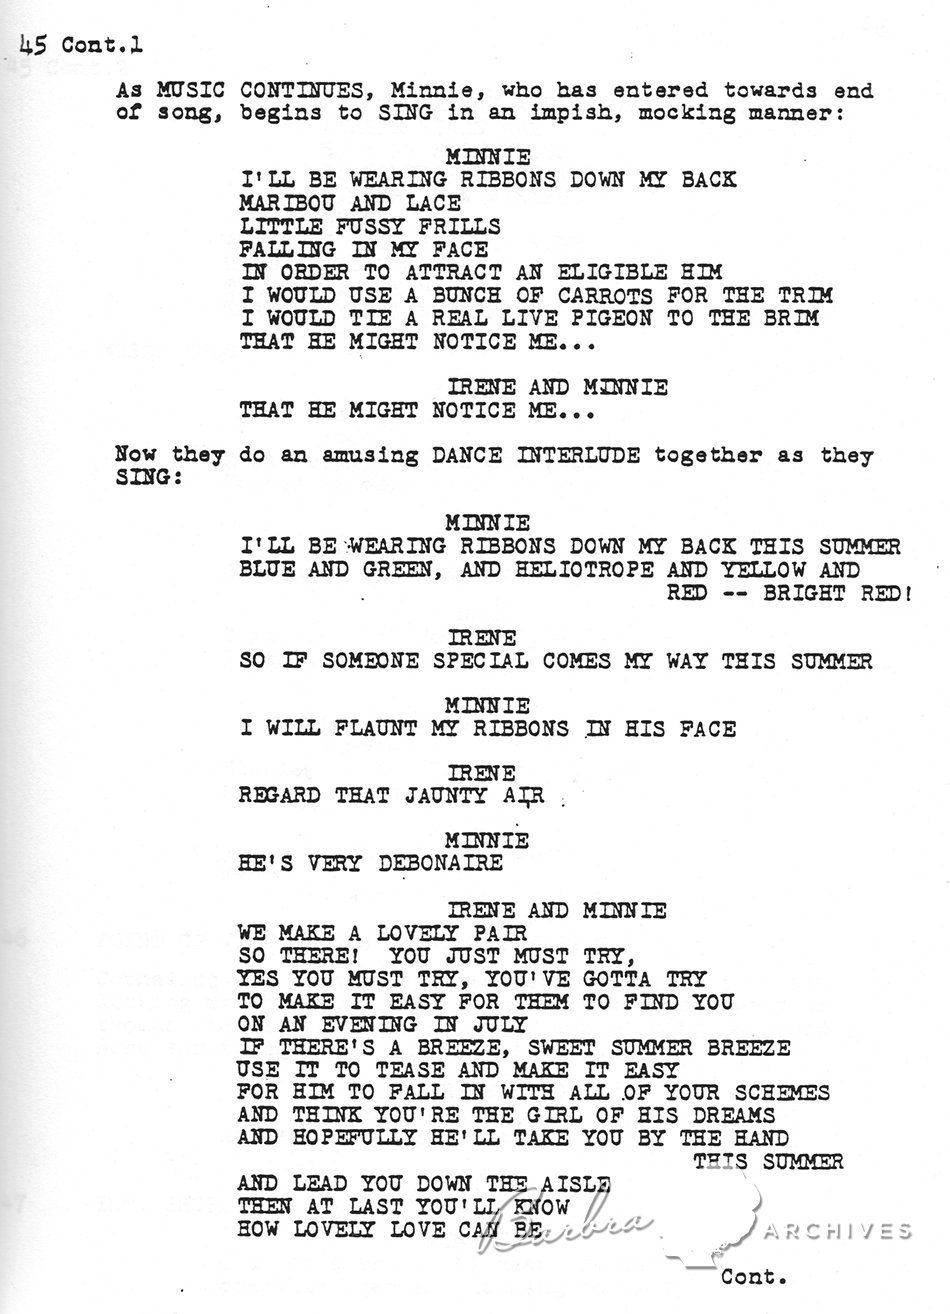 Page of Hello Dolly screenplay with lyrics to the duet